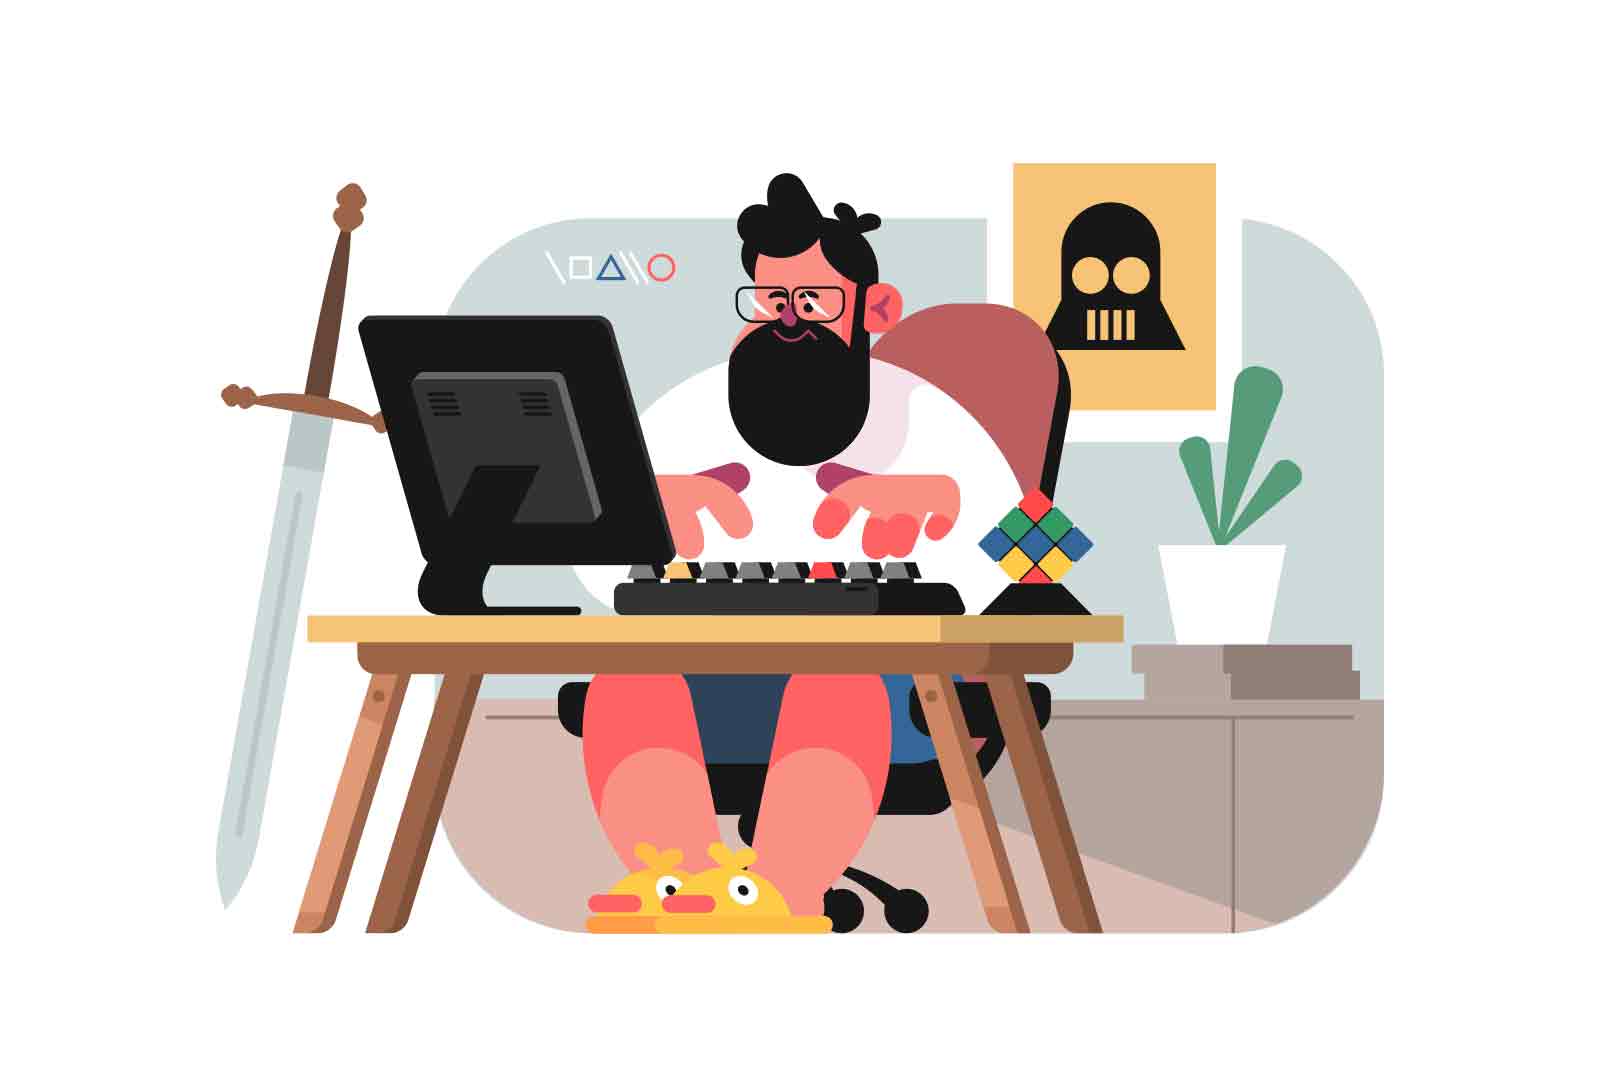 Man by Computer and Sword at Desk, vector illustration. Bearded man wearing red shirt sits on chair by wooden desk.